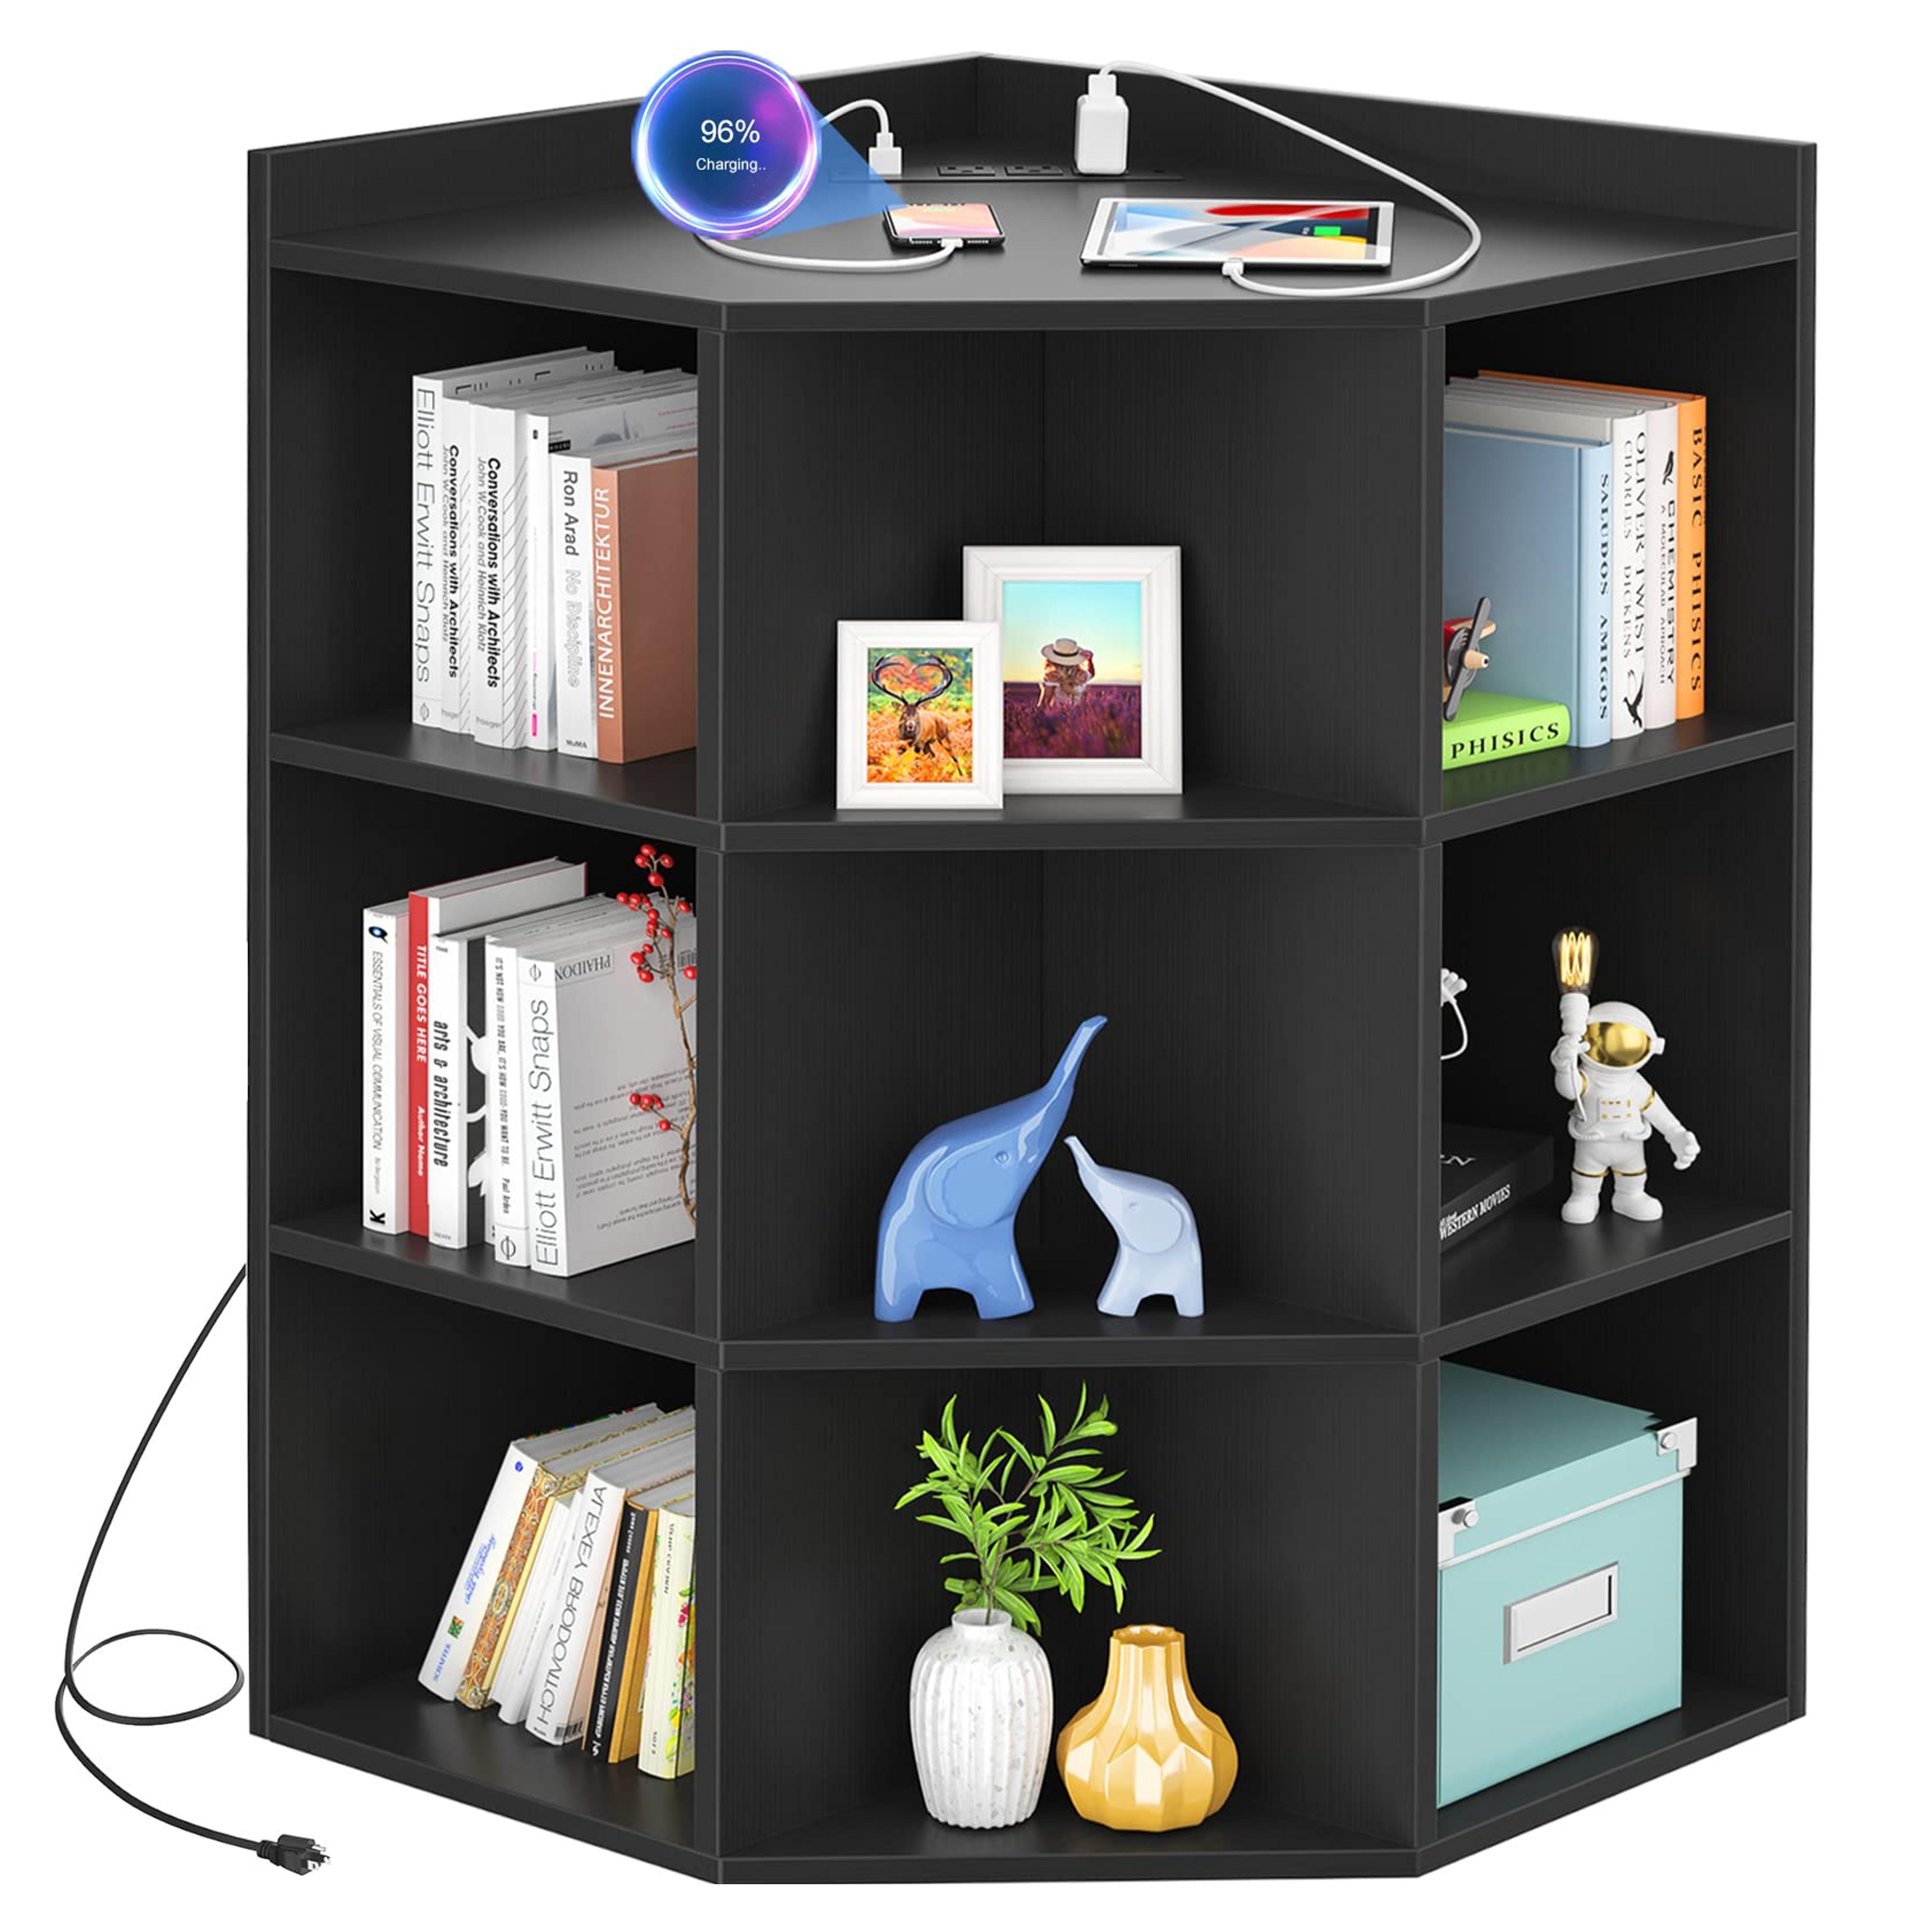 Aheaplus Corner Cabinet, Black Corner Storage with USB Ports and Outlets, Corner Cube Toy Storage for Small Space, Wooden Cubby Corner Bookshelf with 9 Cubes for Playroom, Bedroom, Living Room, Black